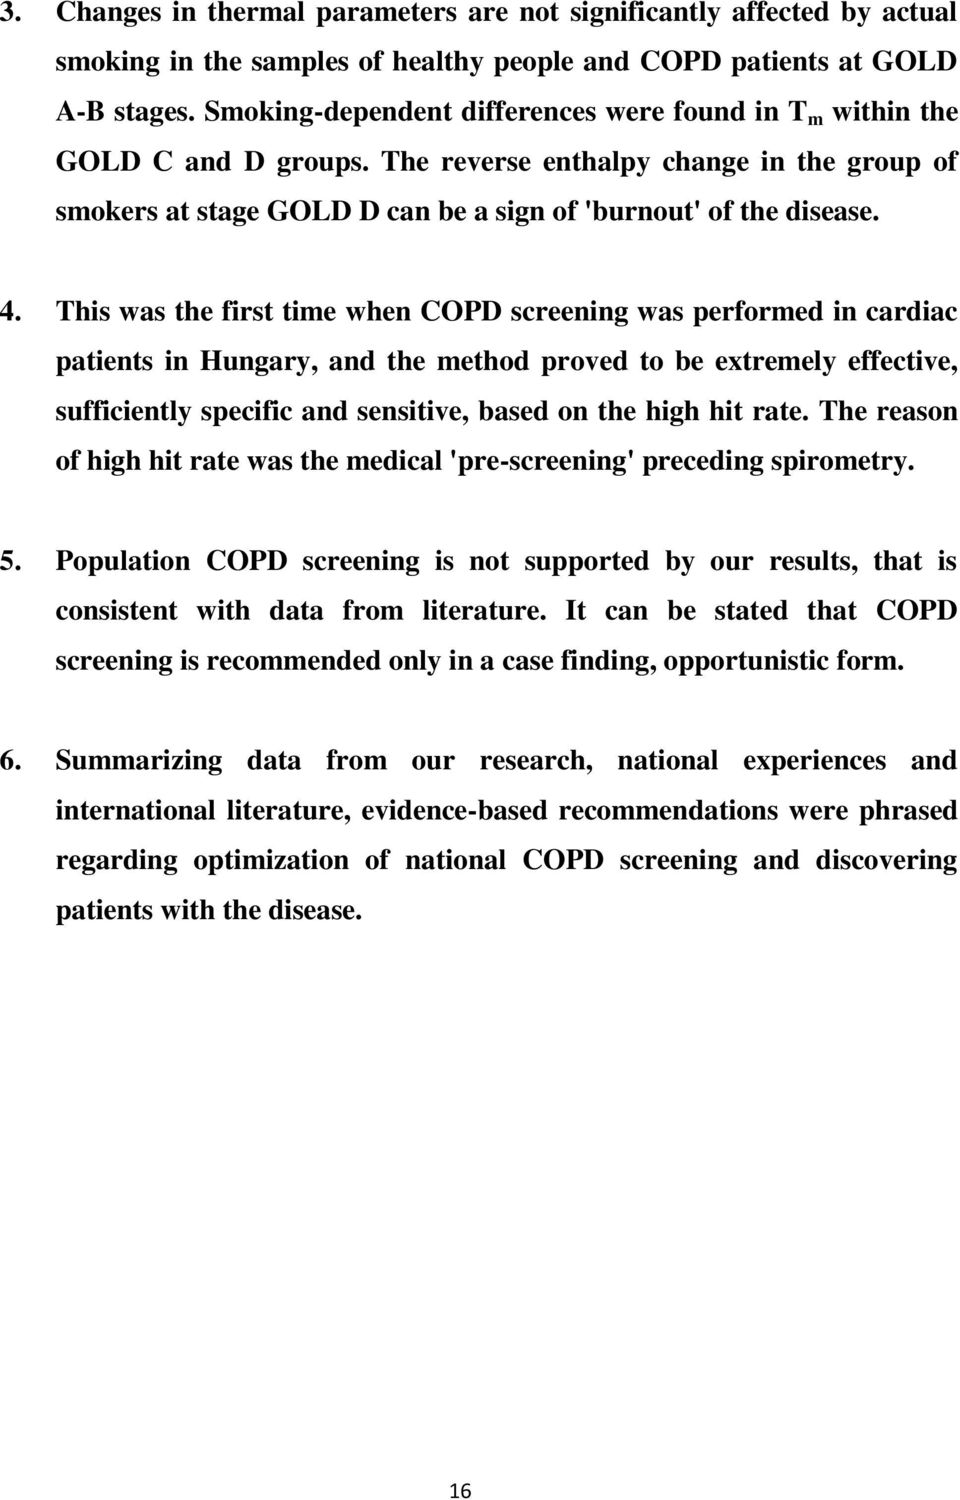 This was the first time when COPD screening was performed in cardiac patients in Hungary, and the method proved to be extremely effective, sufficiently specific and sensitive, based on the high hit